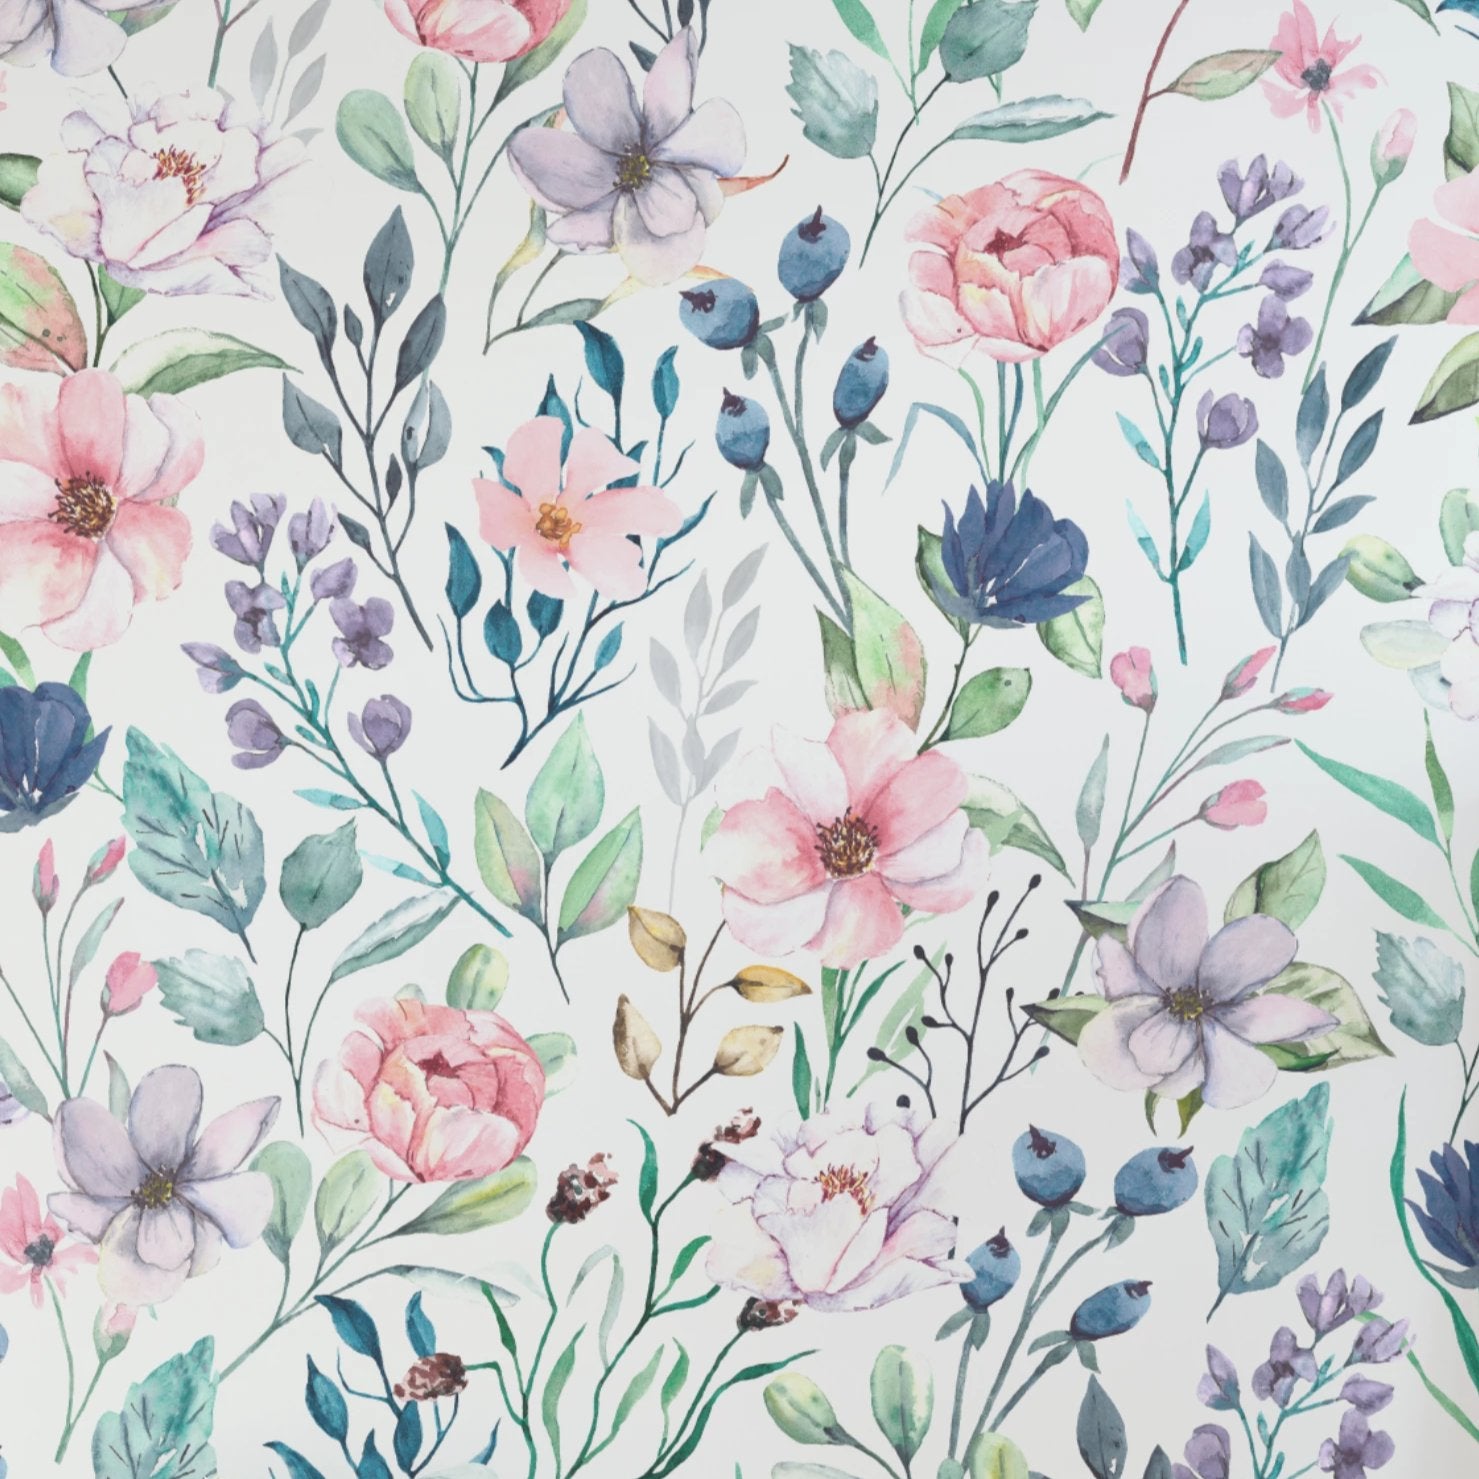 The Watercolor Floral Wallpaper IV displays a lush pattern of medium-sized watercolor blossoms, creating a vibrant and fresh wall covering for any space in need of a floral touch.